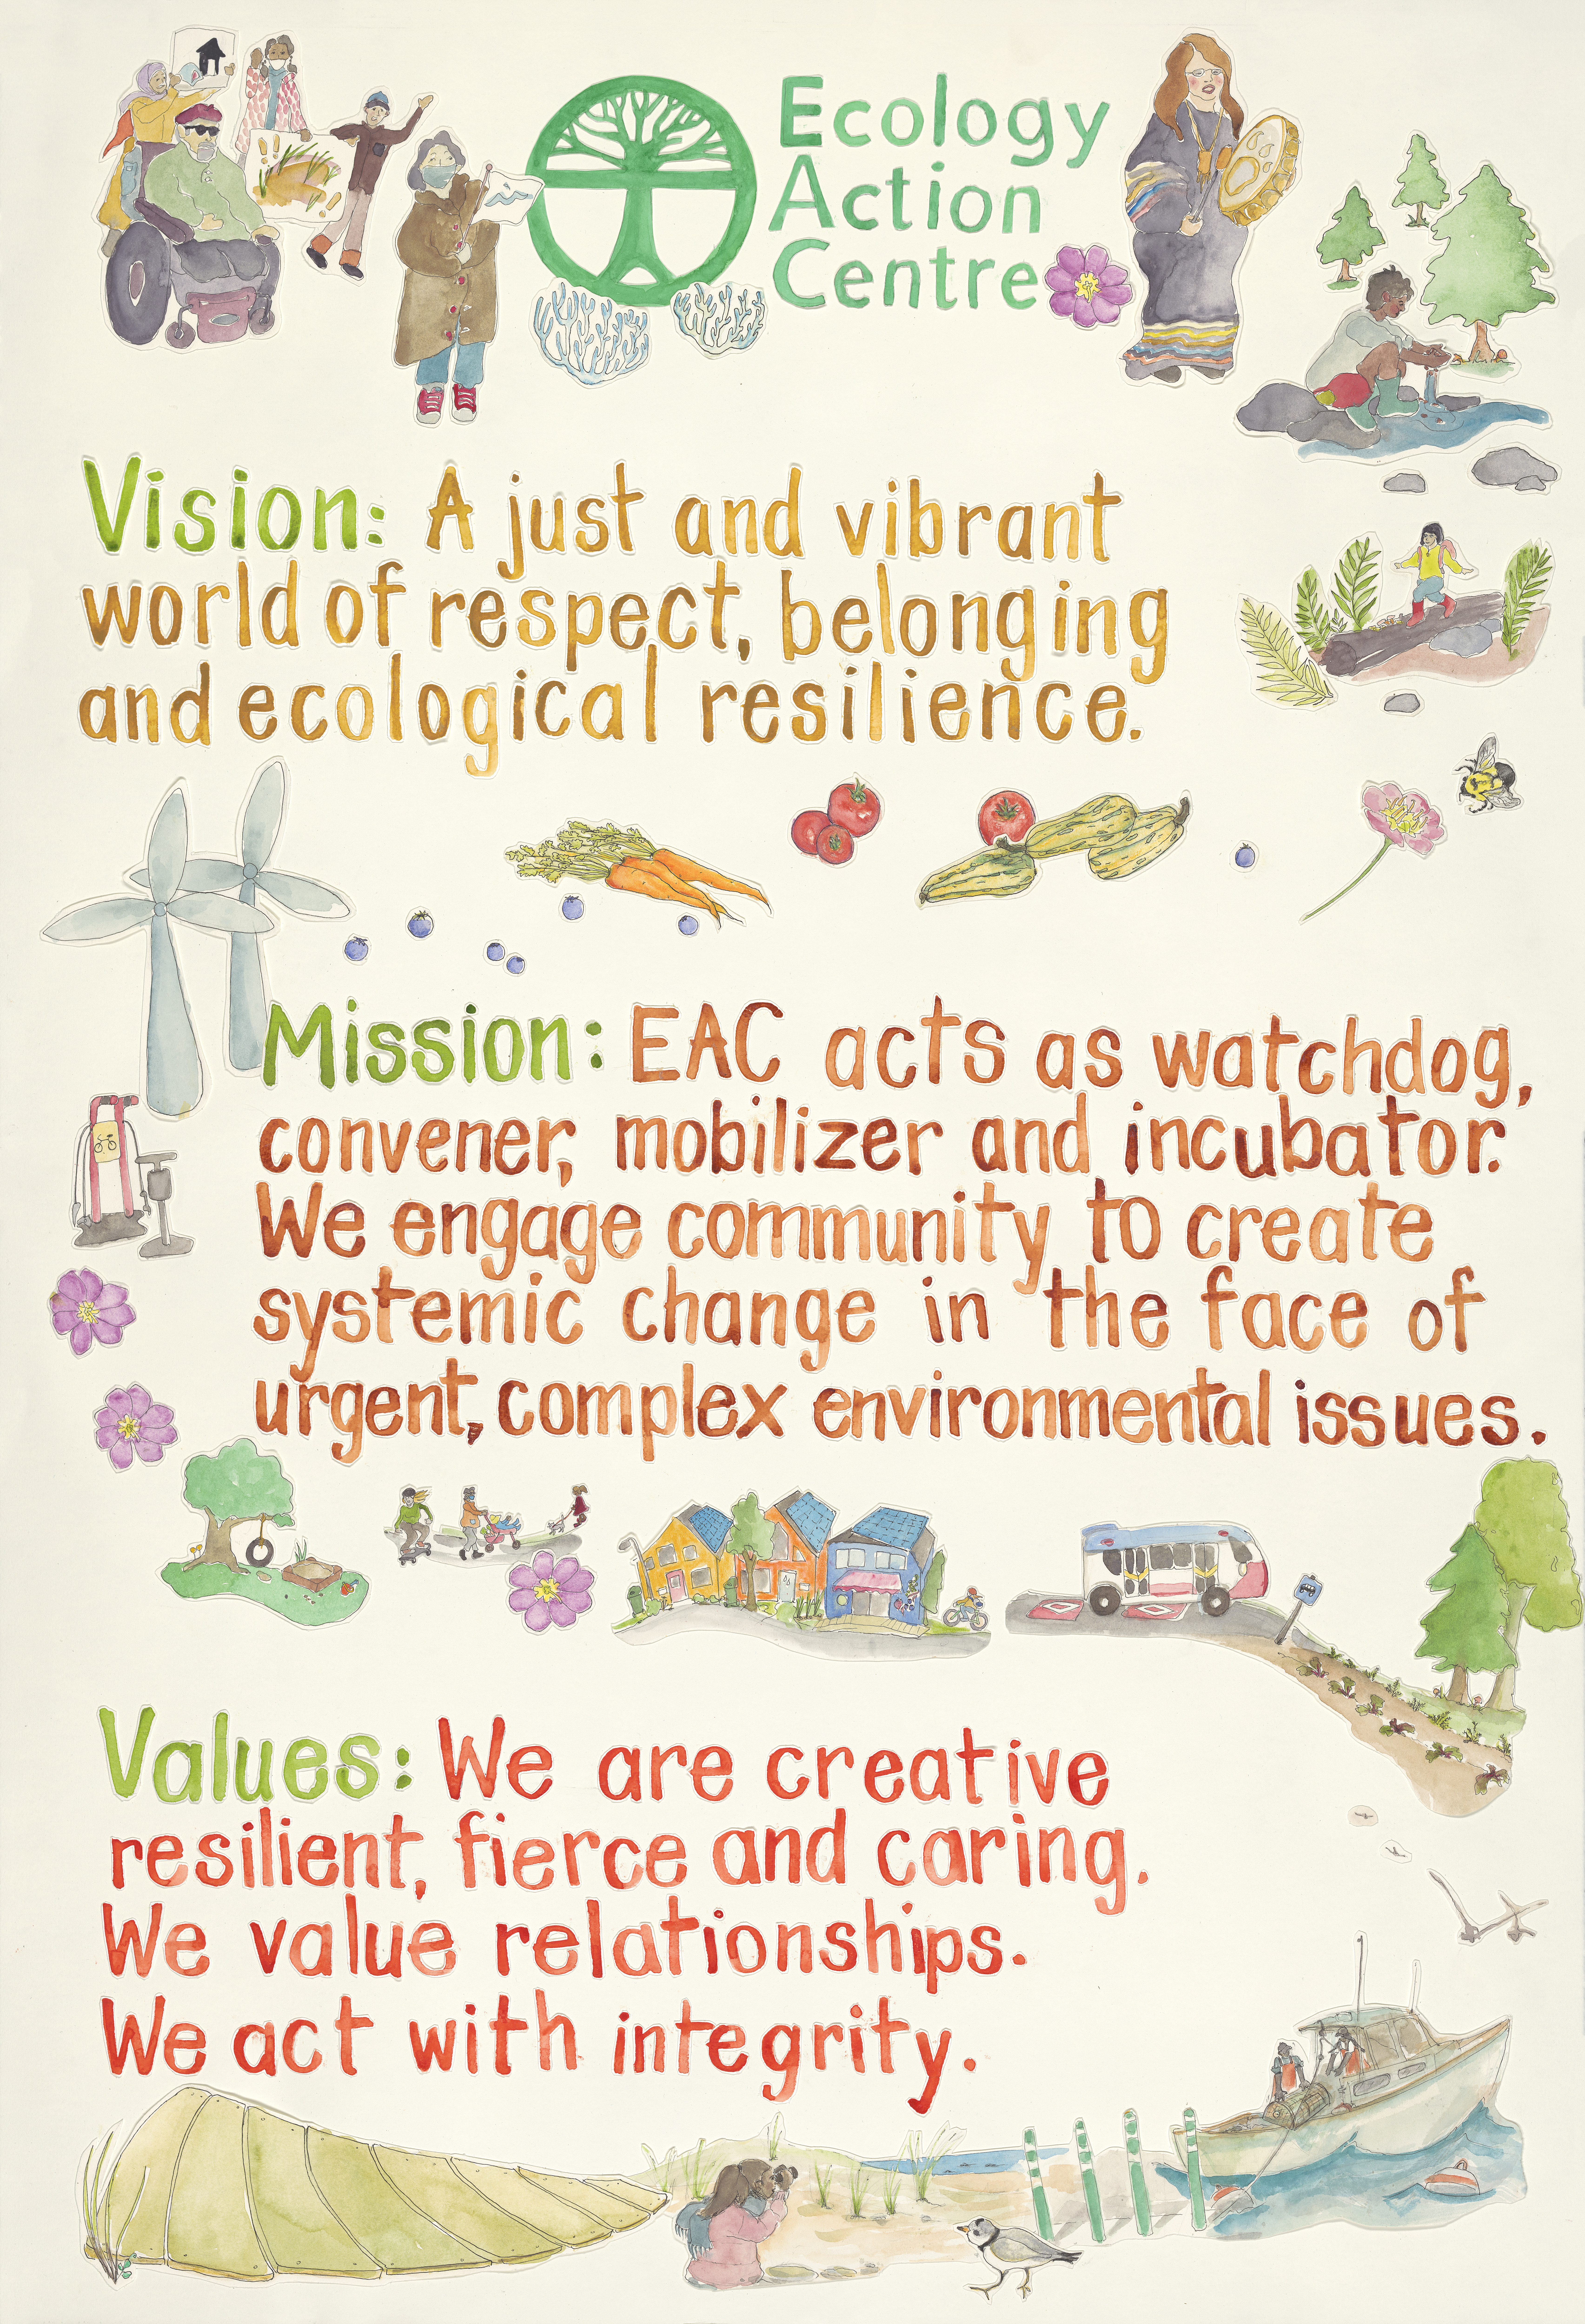 EAC's mission, vision, and values written in watercolours with small drawings and paintings of EAC-related images surrounding them